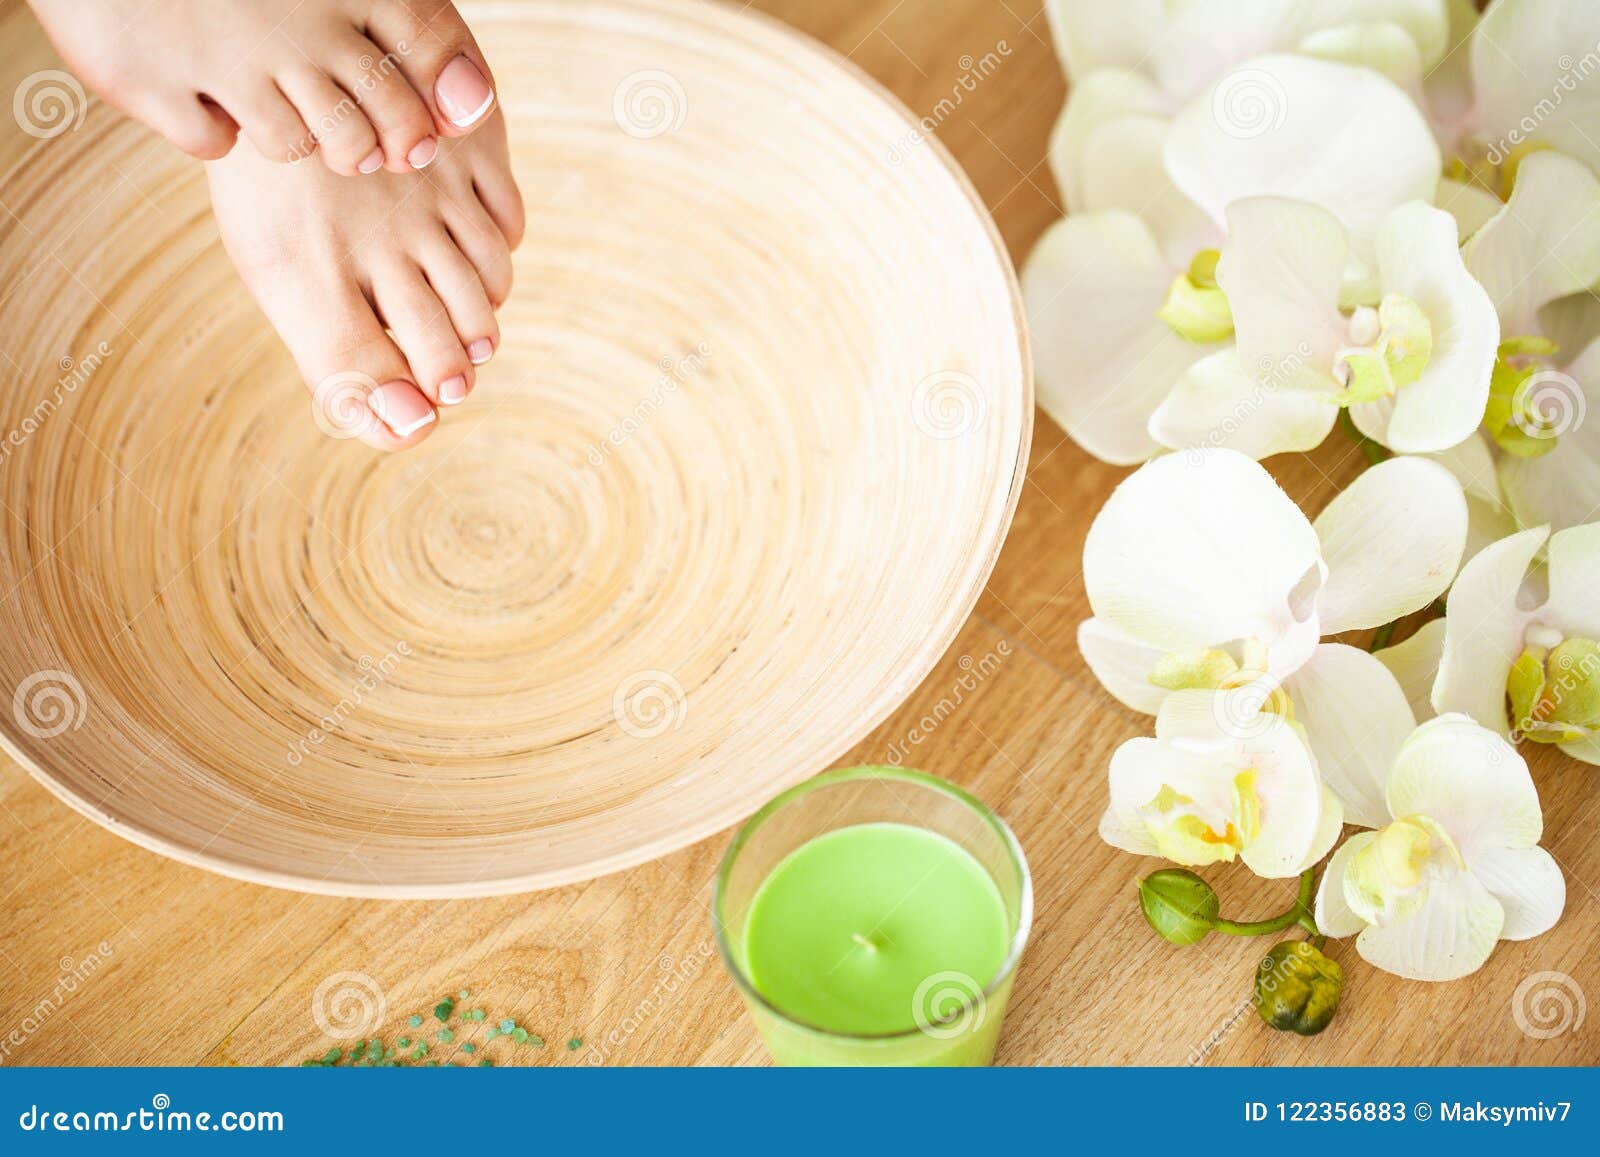 Close Up Photo Of A Female Feet At Spa Salon On Pedicure Procedure Stock Image Image Of